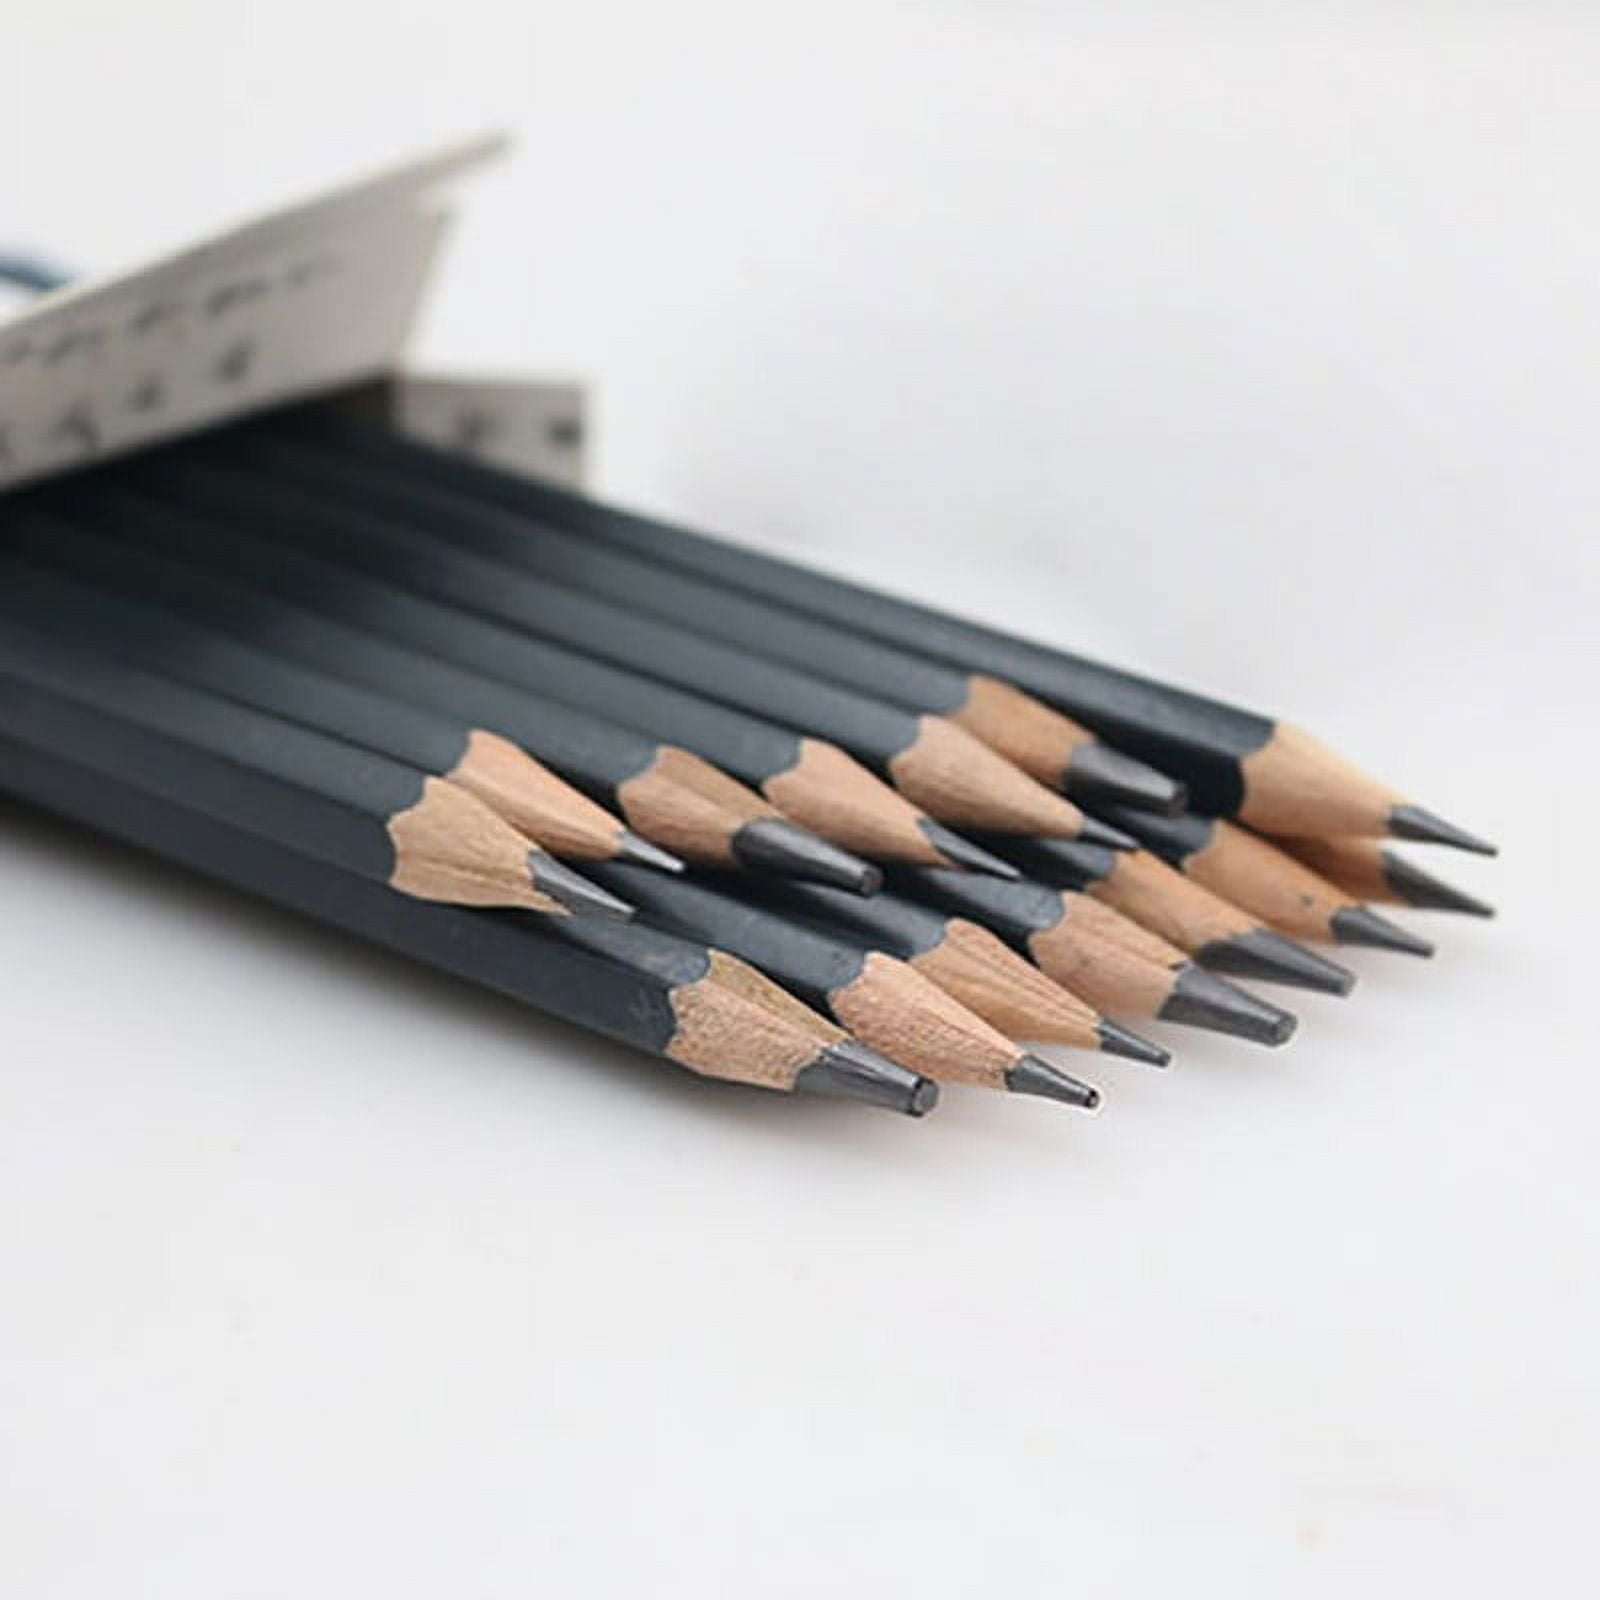 Graphite Drawing Pencils and Sketch Set (14-Piece Kit), 1B - 6H, Ideal for  Drawing Art, Sketching, Shading, Artist Pencils for Beginners & Pro Artists